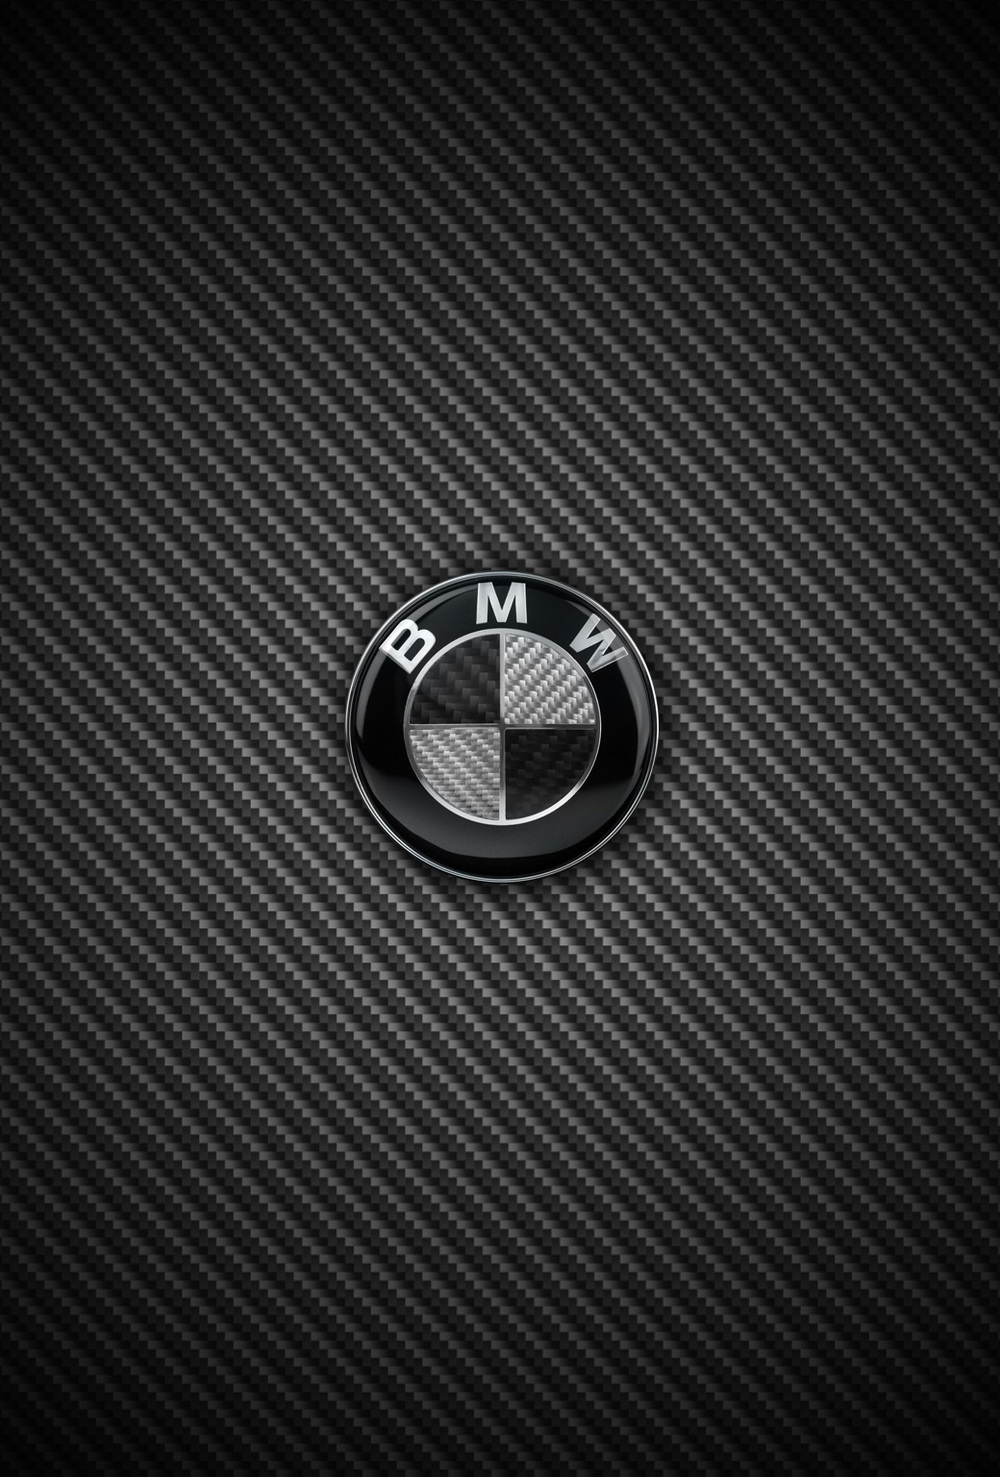 BMW Logo iPhone Wallpapers  Top Free BMW Logo iPhone Backgrounds   WallpaperAccess